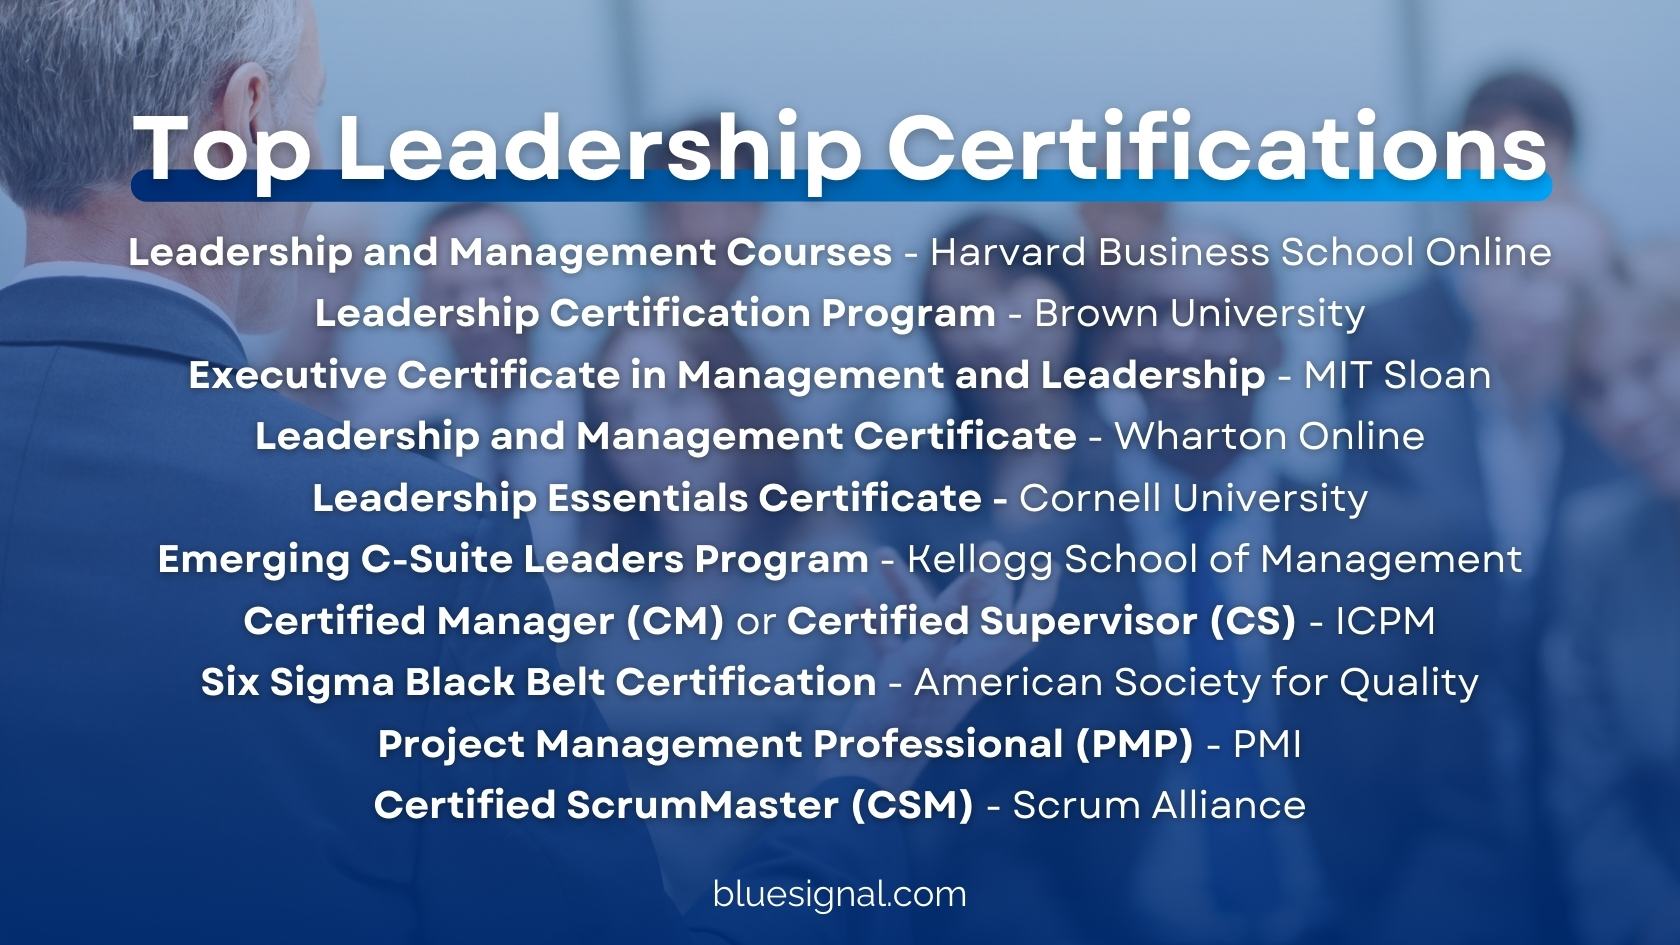 List of top leadership certifications including courses from Harvard, Brown, MIT Sloan, Wharton, Cornell, and more.